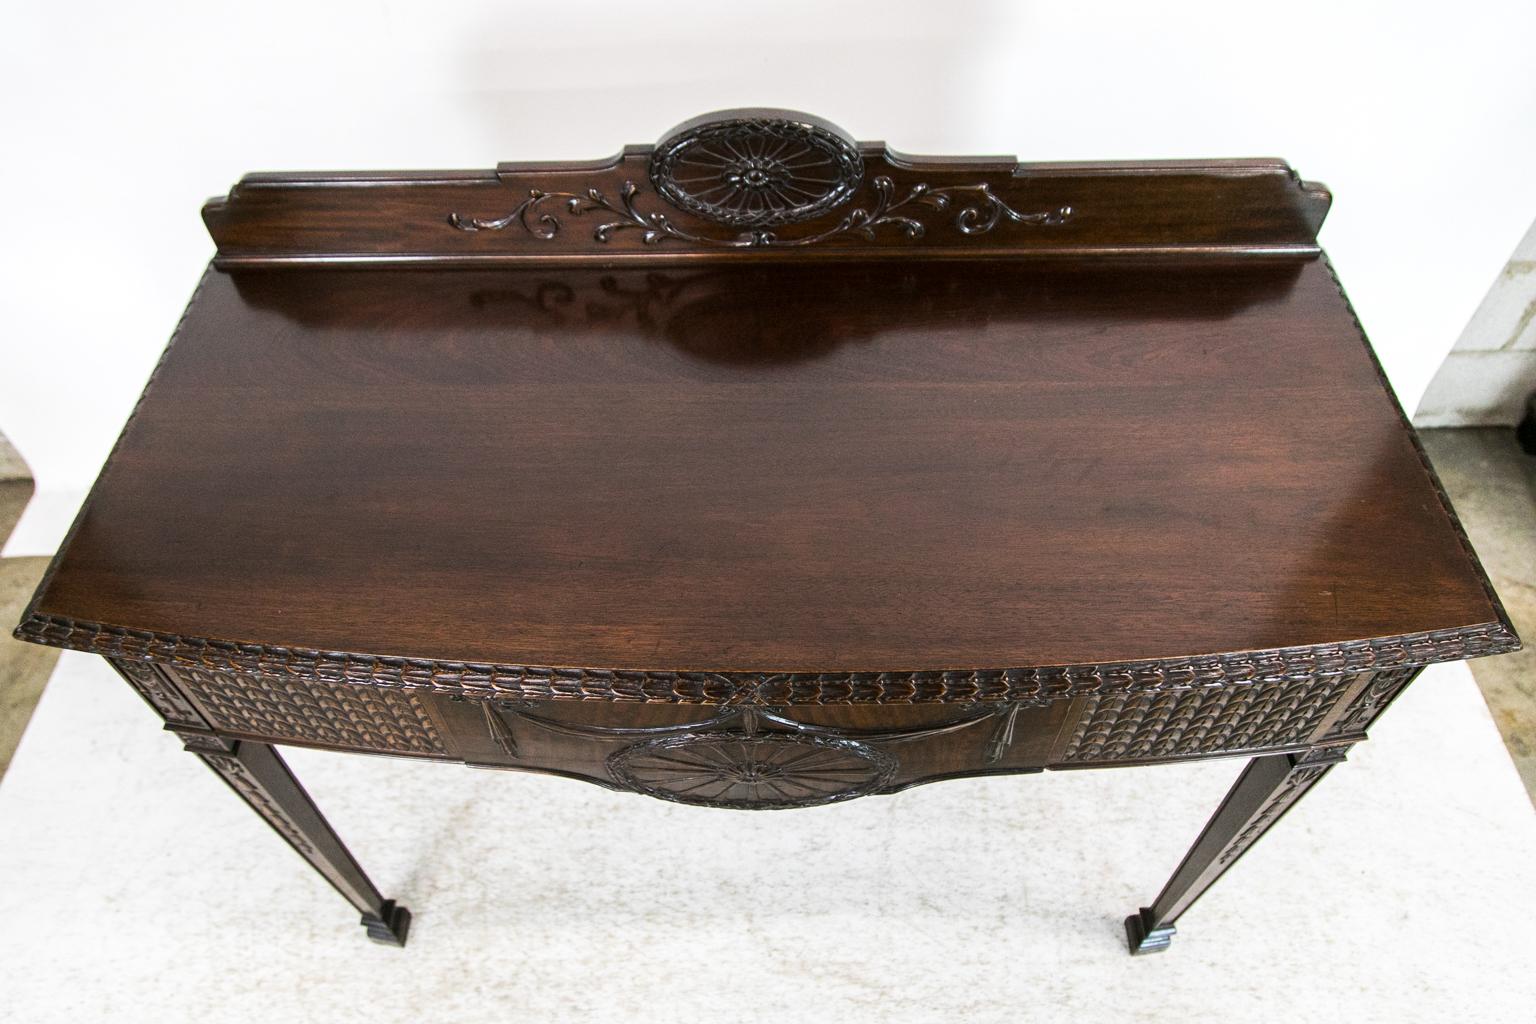 The rear gallery of this console table has a carved oval crest above carved leaf arabesque. The top molding is carved with a repeating stylized bell flower. The apron consists of a center door carved with ribbon swags supporting a carved oval